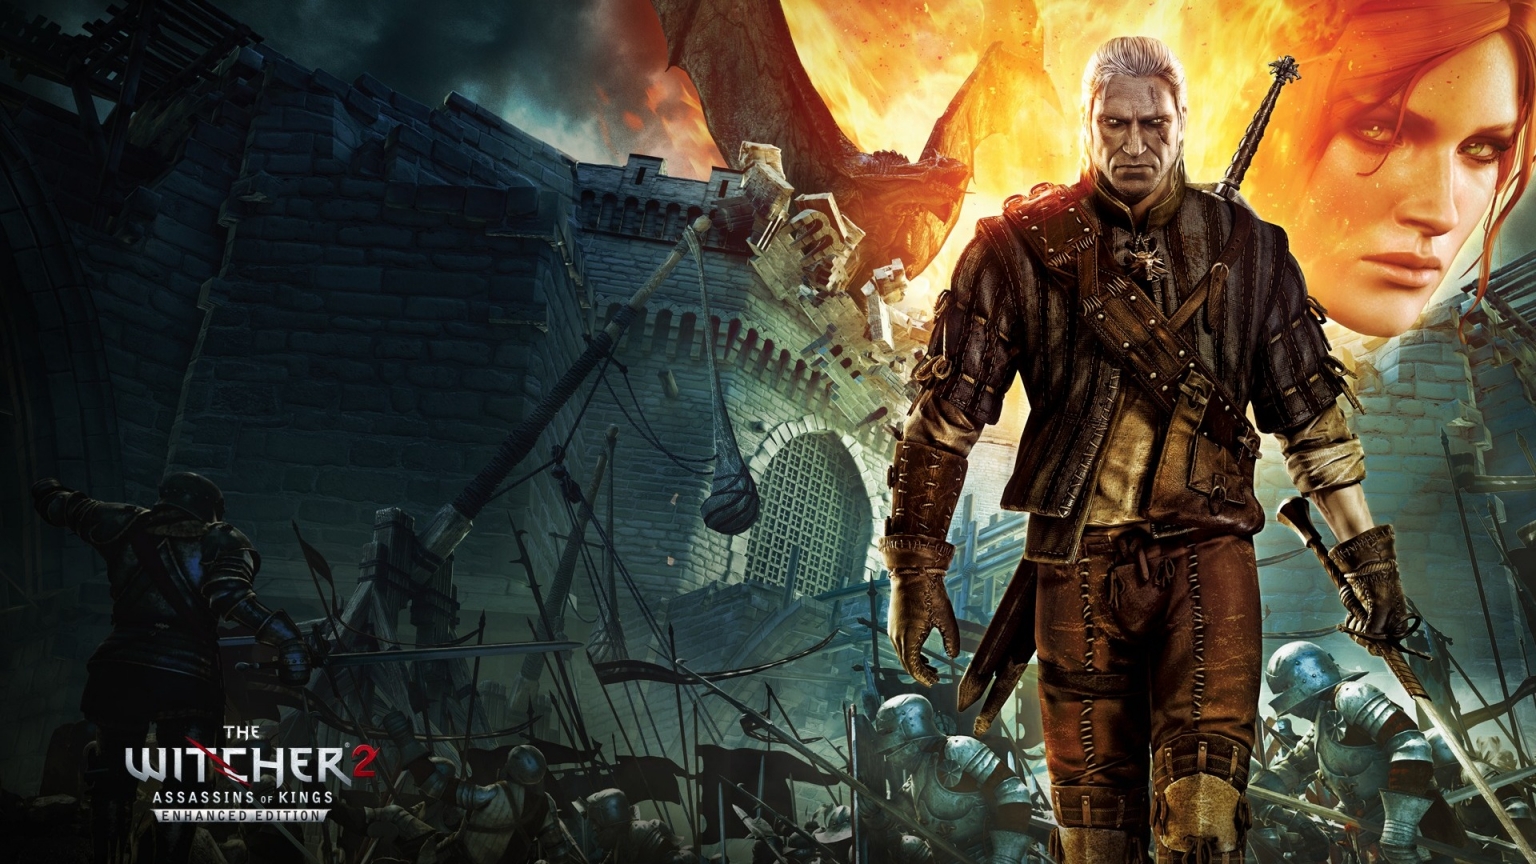 The Witcher 2 Assassins of Kings PC Game for 1536 x 864 HDTV resolution